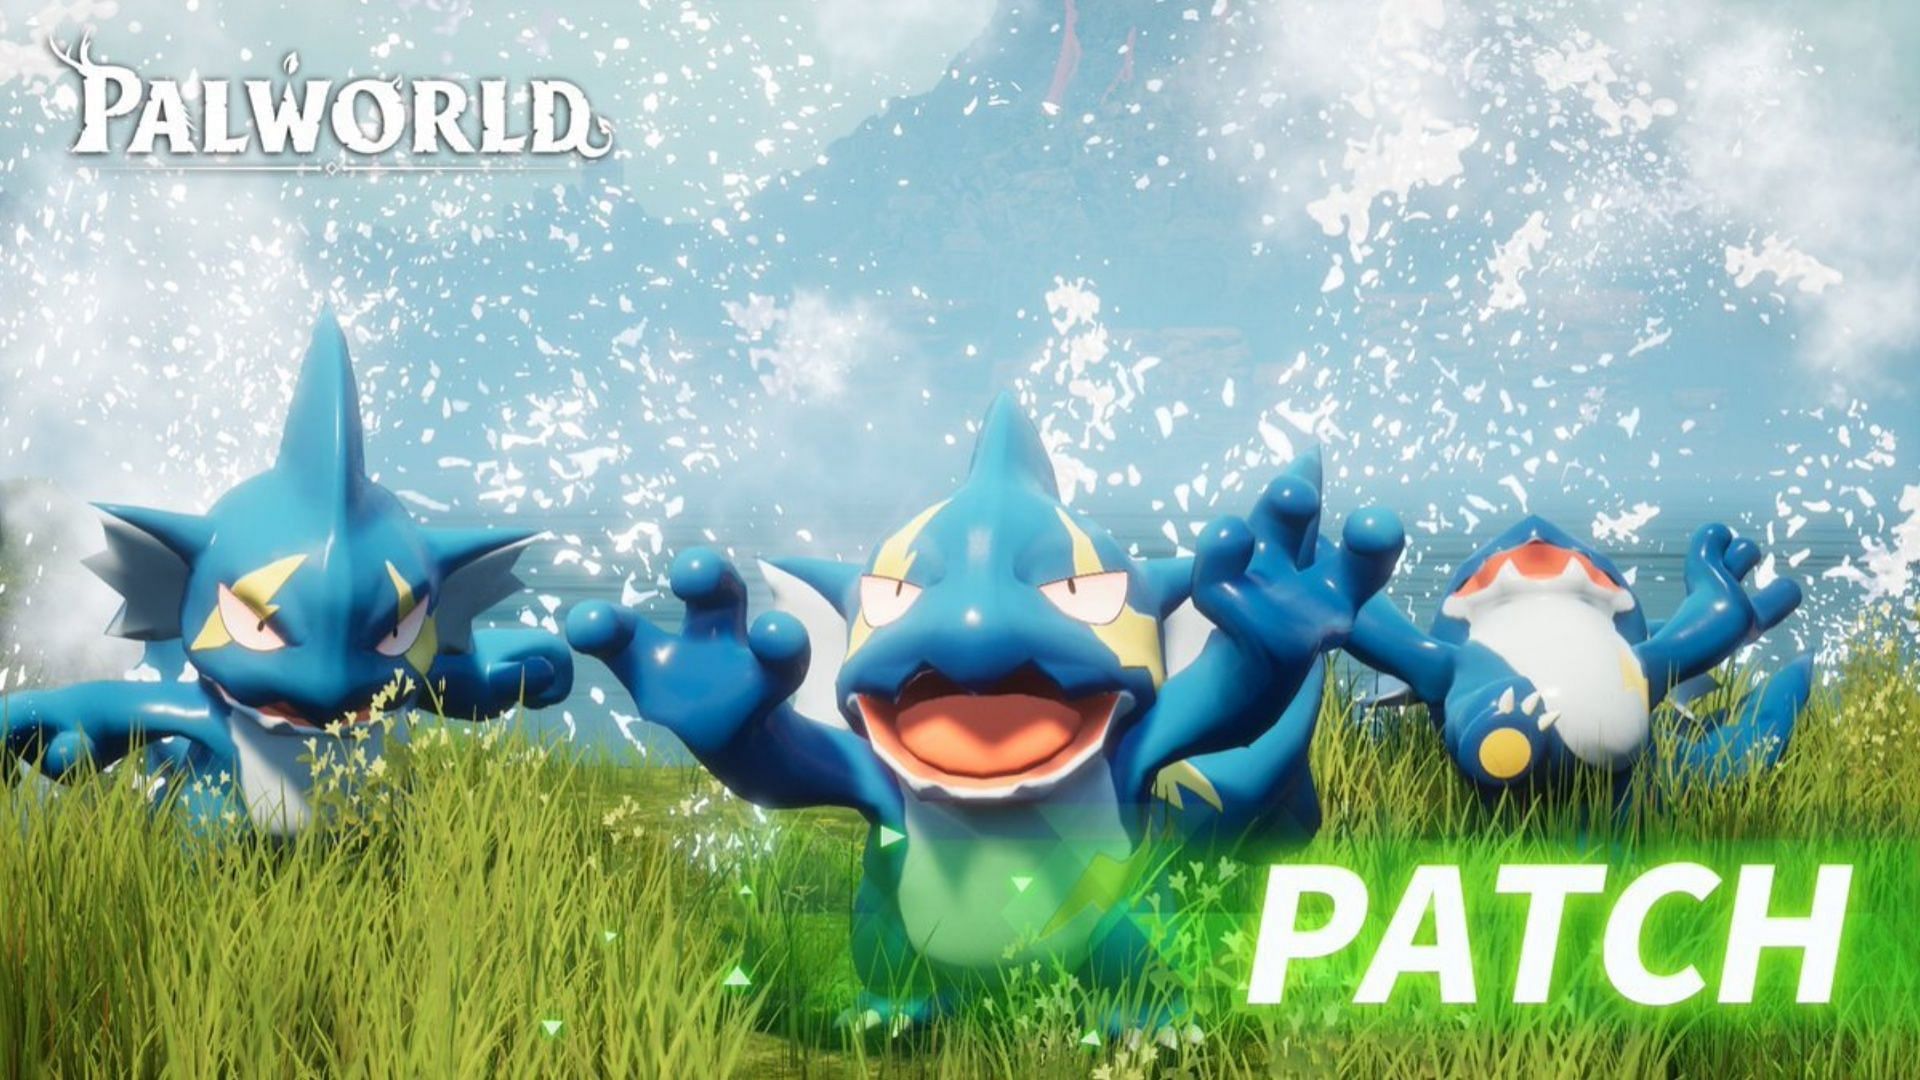 Palworld update today (May 14): Patch notes revealed (Image via Pocket Pair)